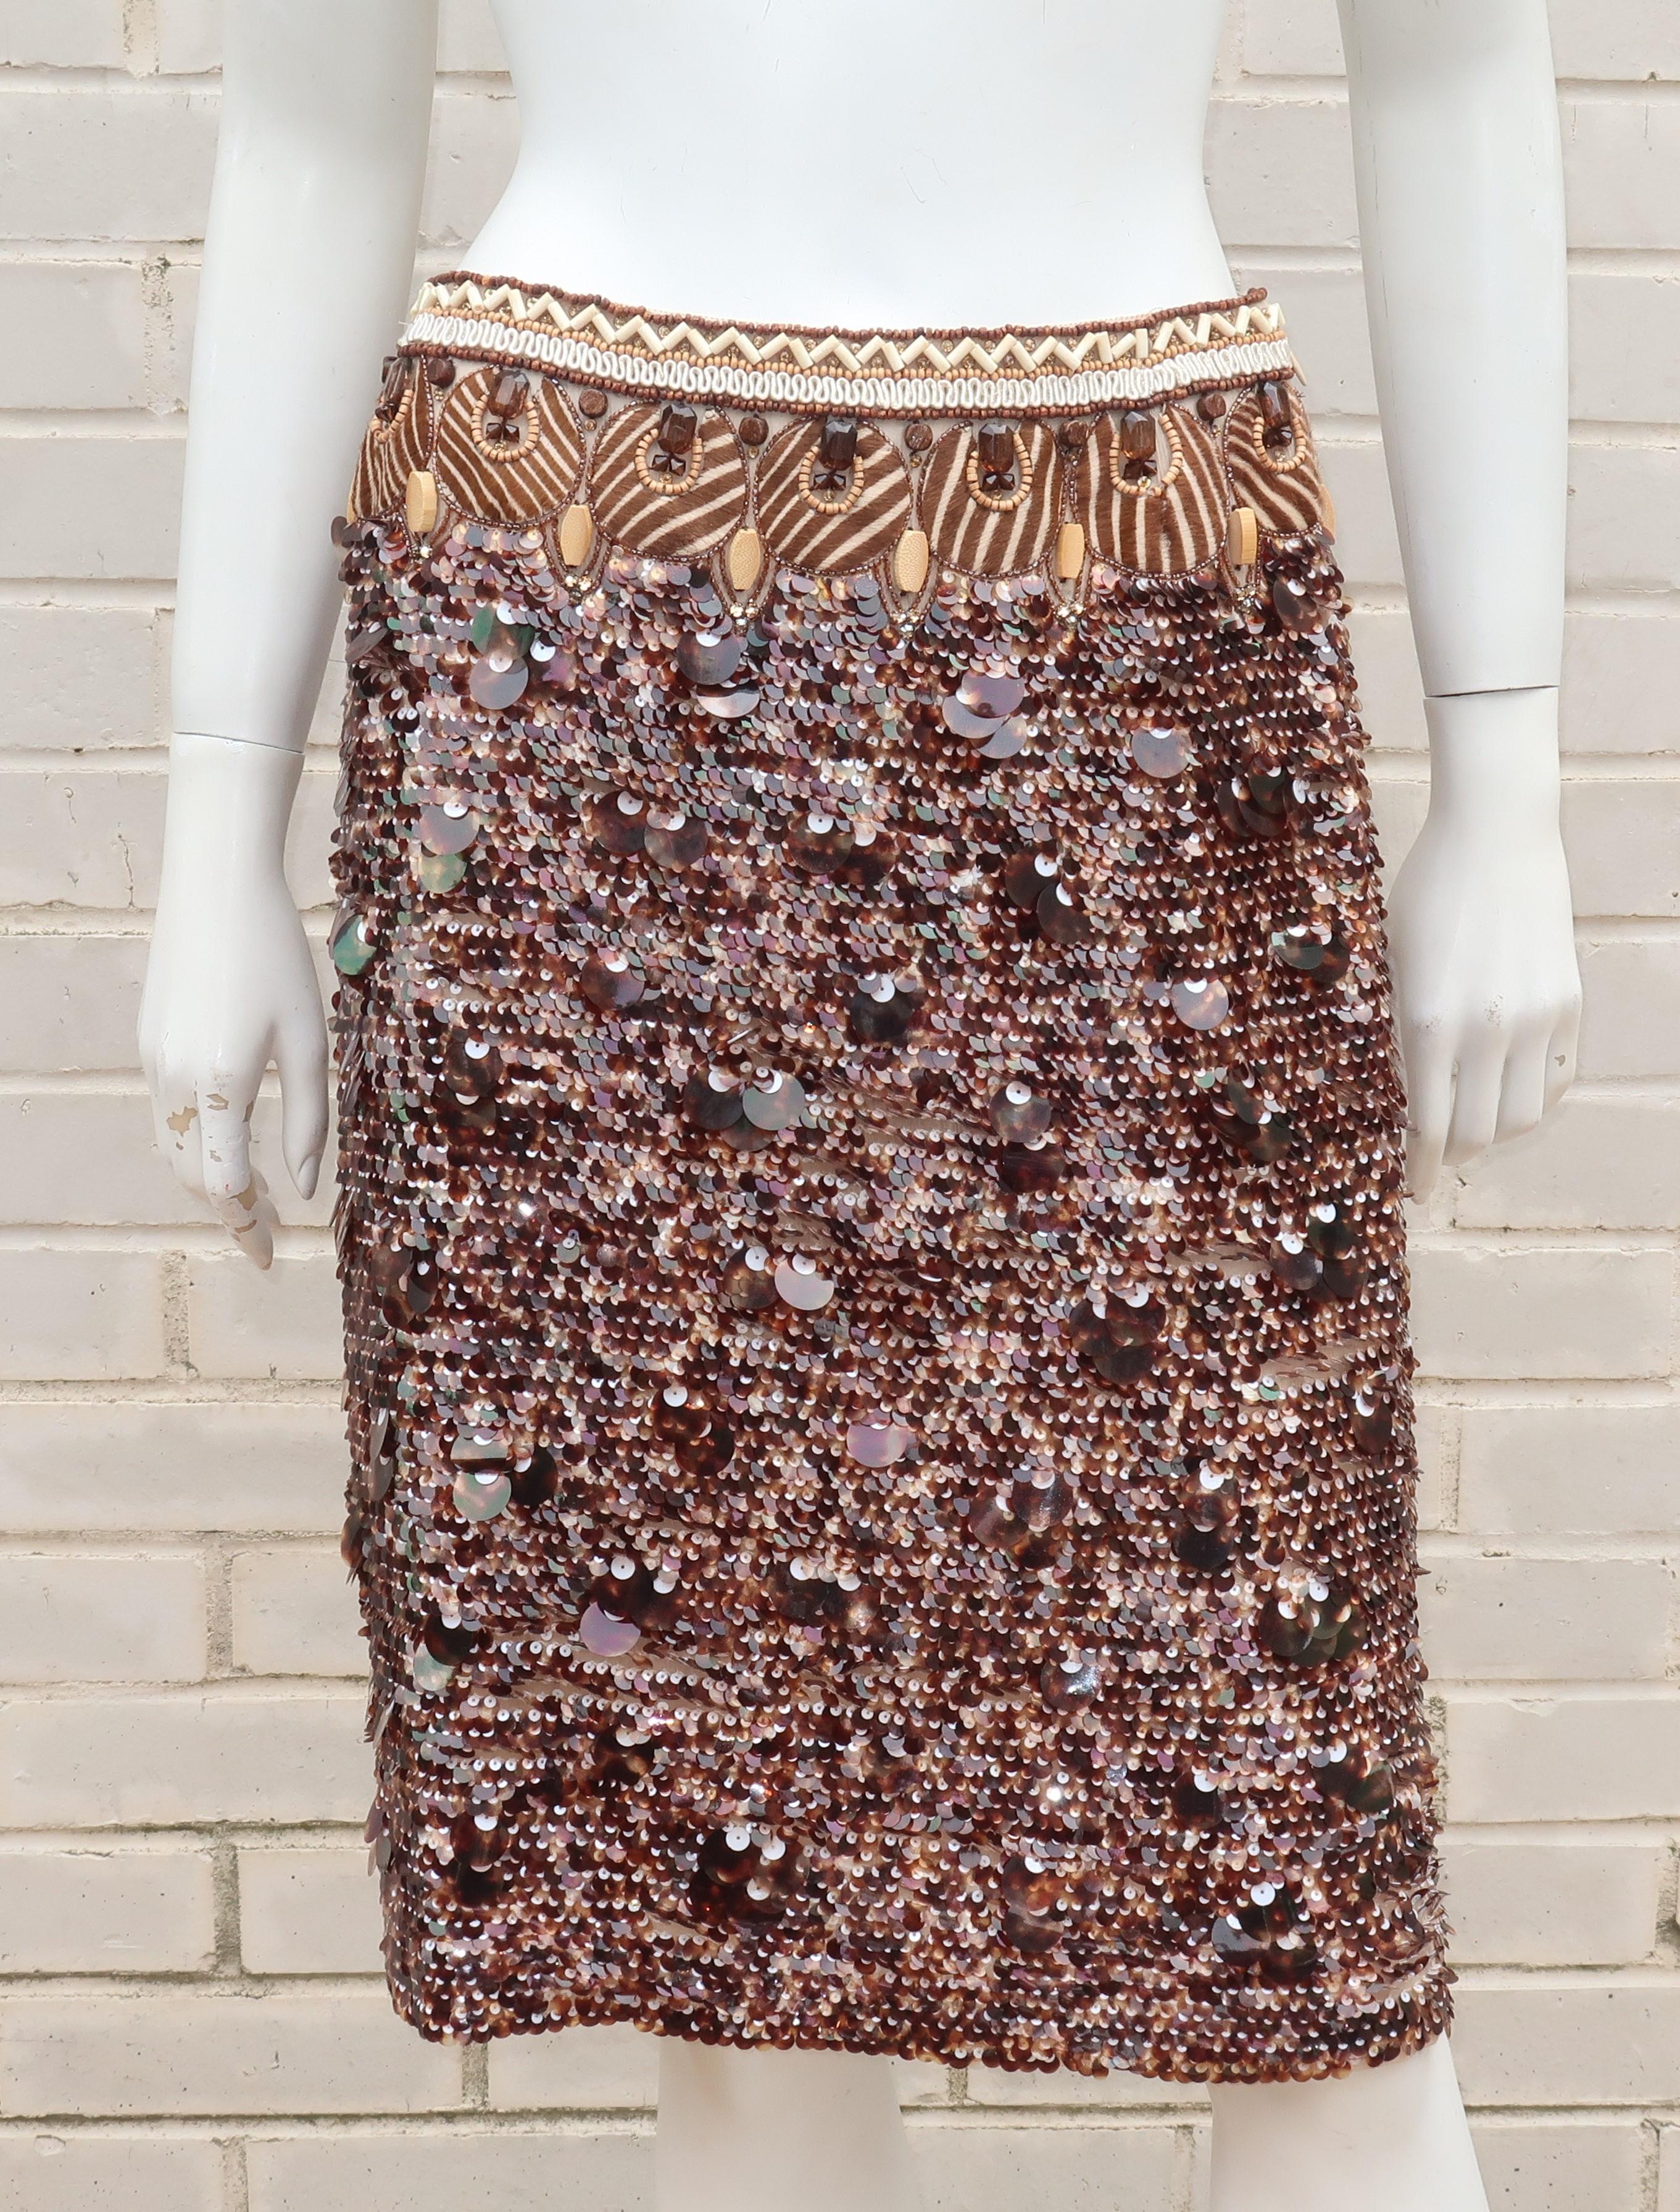 Channel your inner wild child with this fully embellished Oscar de la Renta sequin skirt.  The exotic motif includes sequins in a faux tortoise brown mixed with white topped off by a waistband decoration incorporating faux animal print fur, wooden